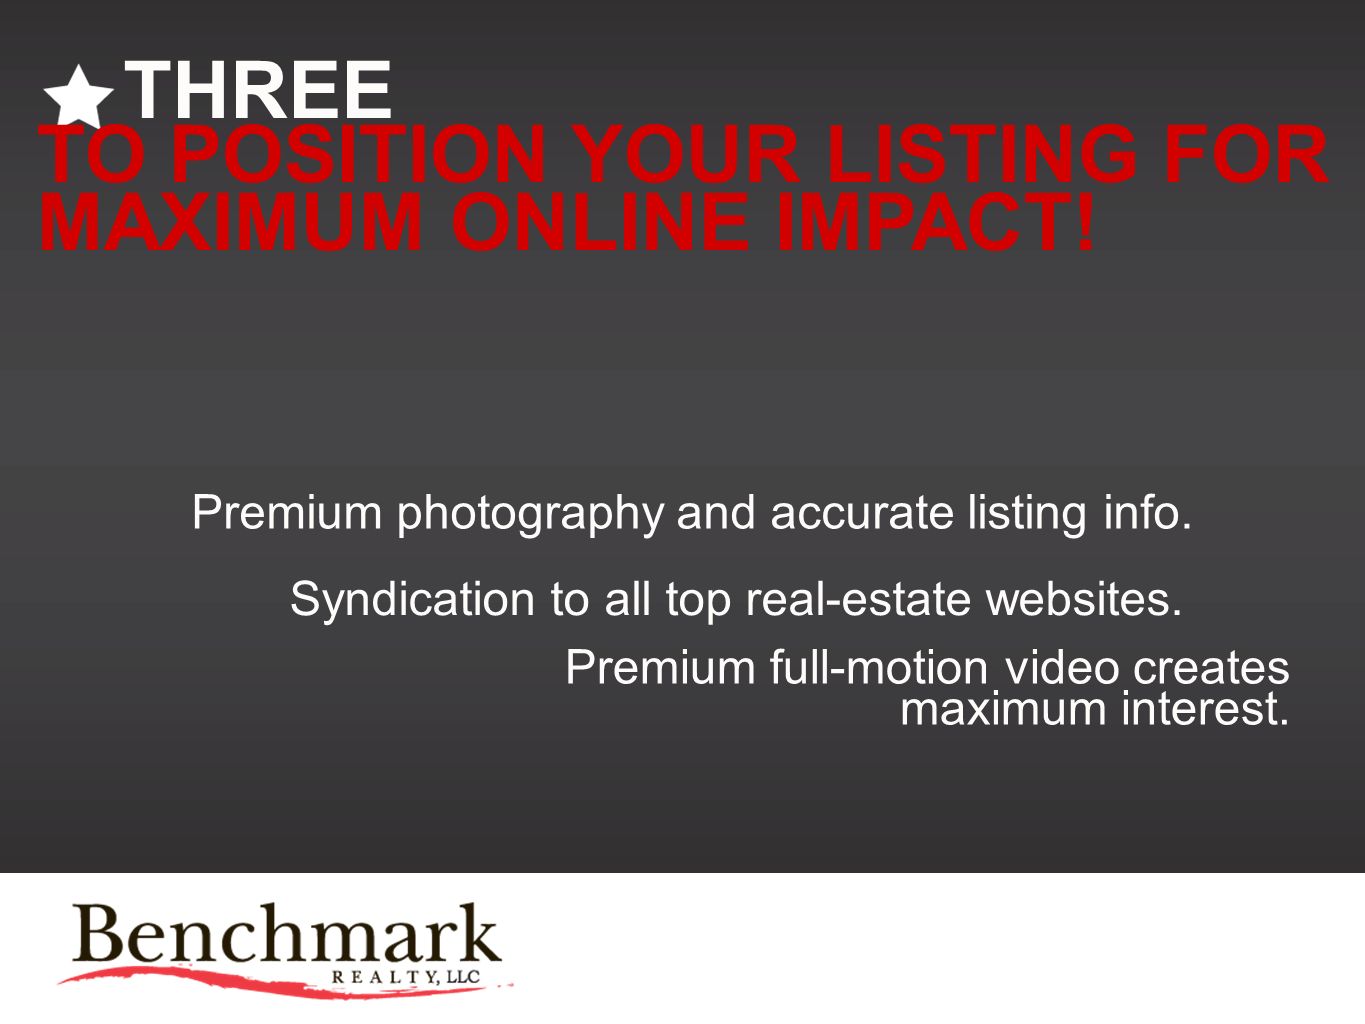 THREE TO POSITION YOUR LISTING FOR MAXIMUM ONLINE IMPACT.